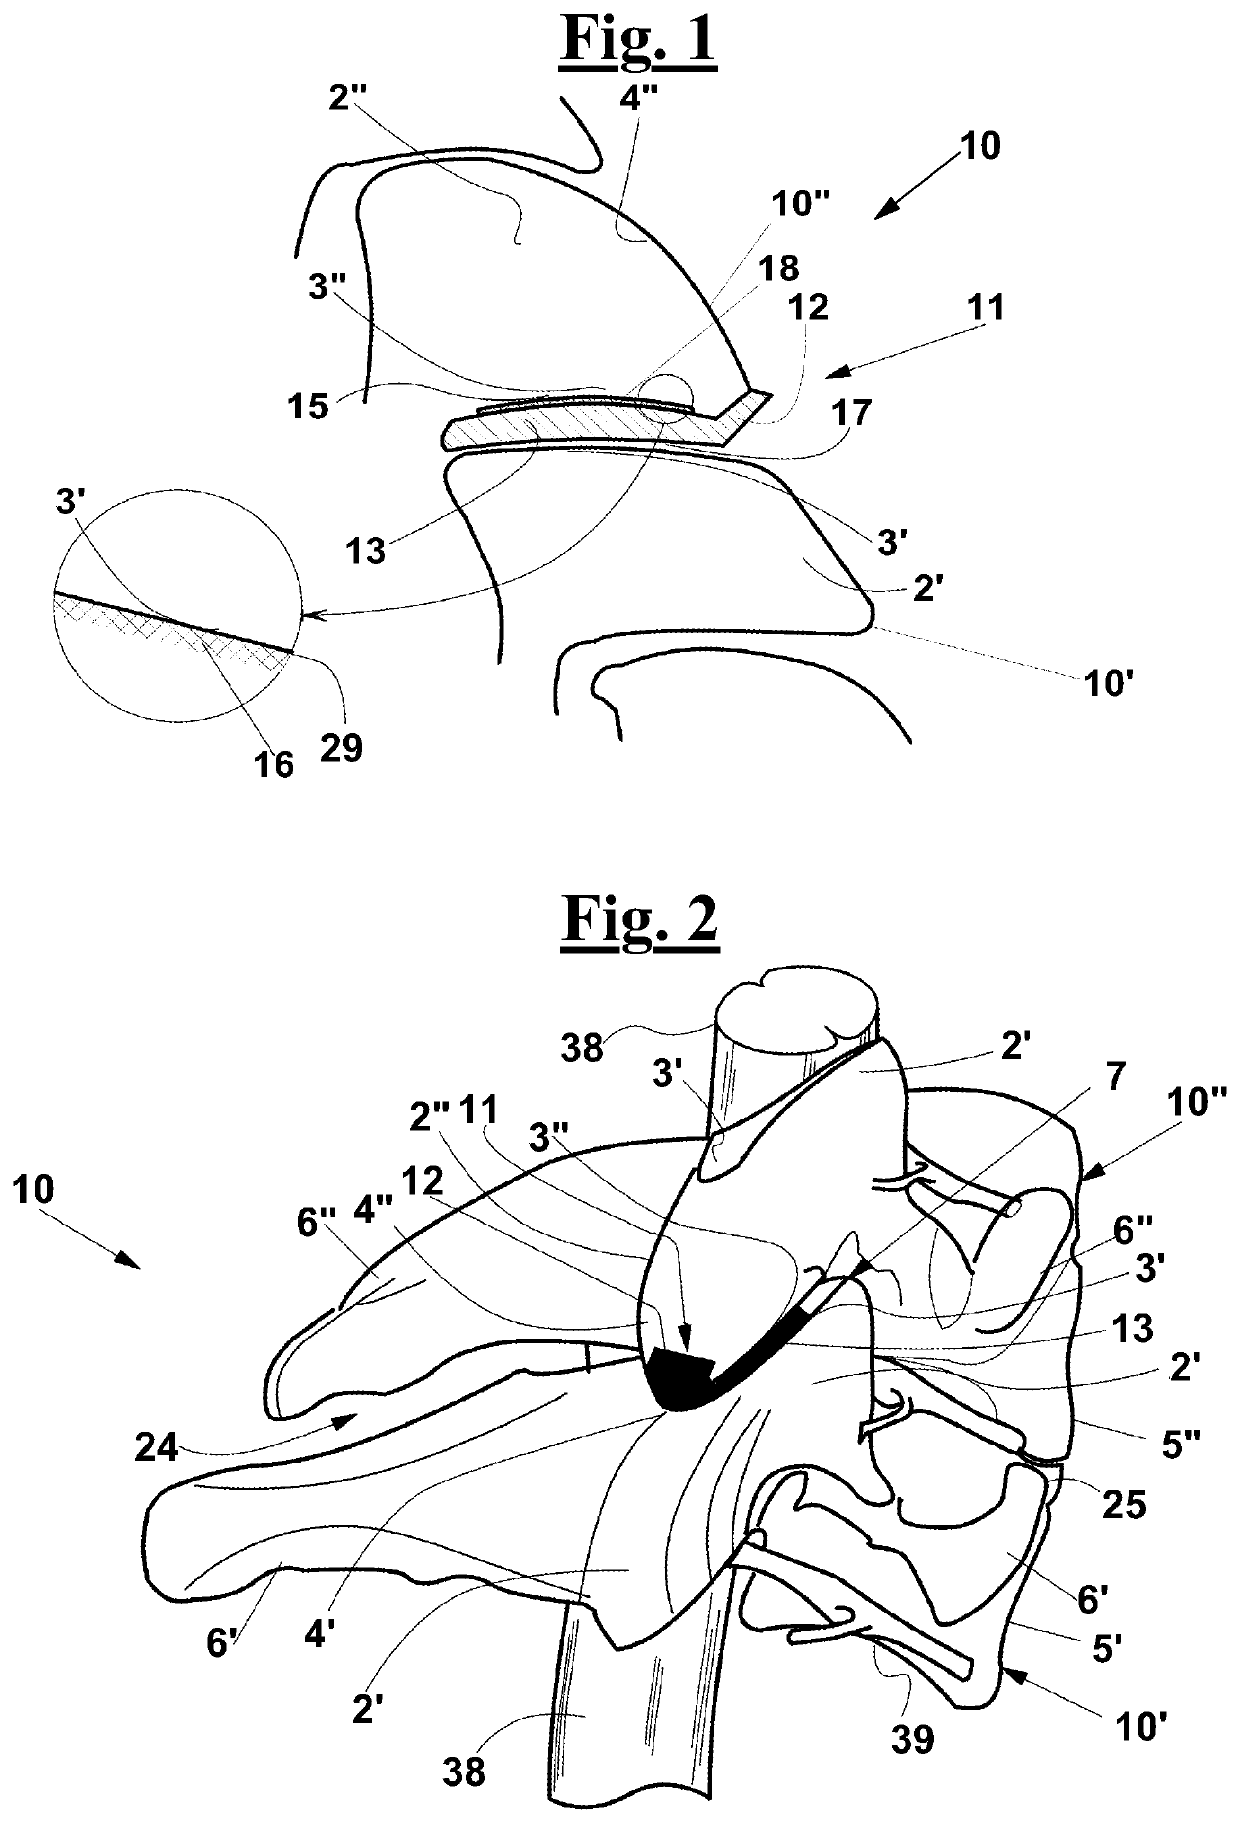 Partial endoprosthesis device for a vertebral joint